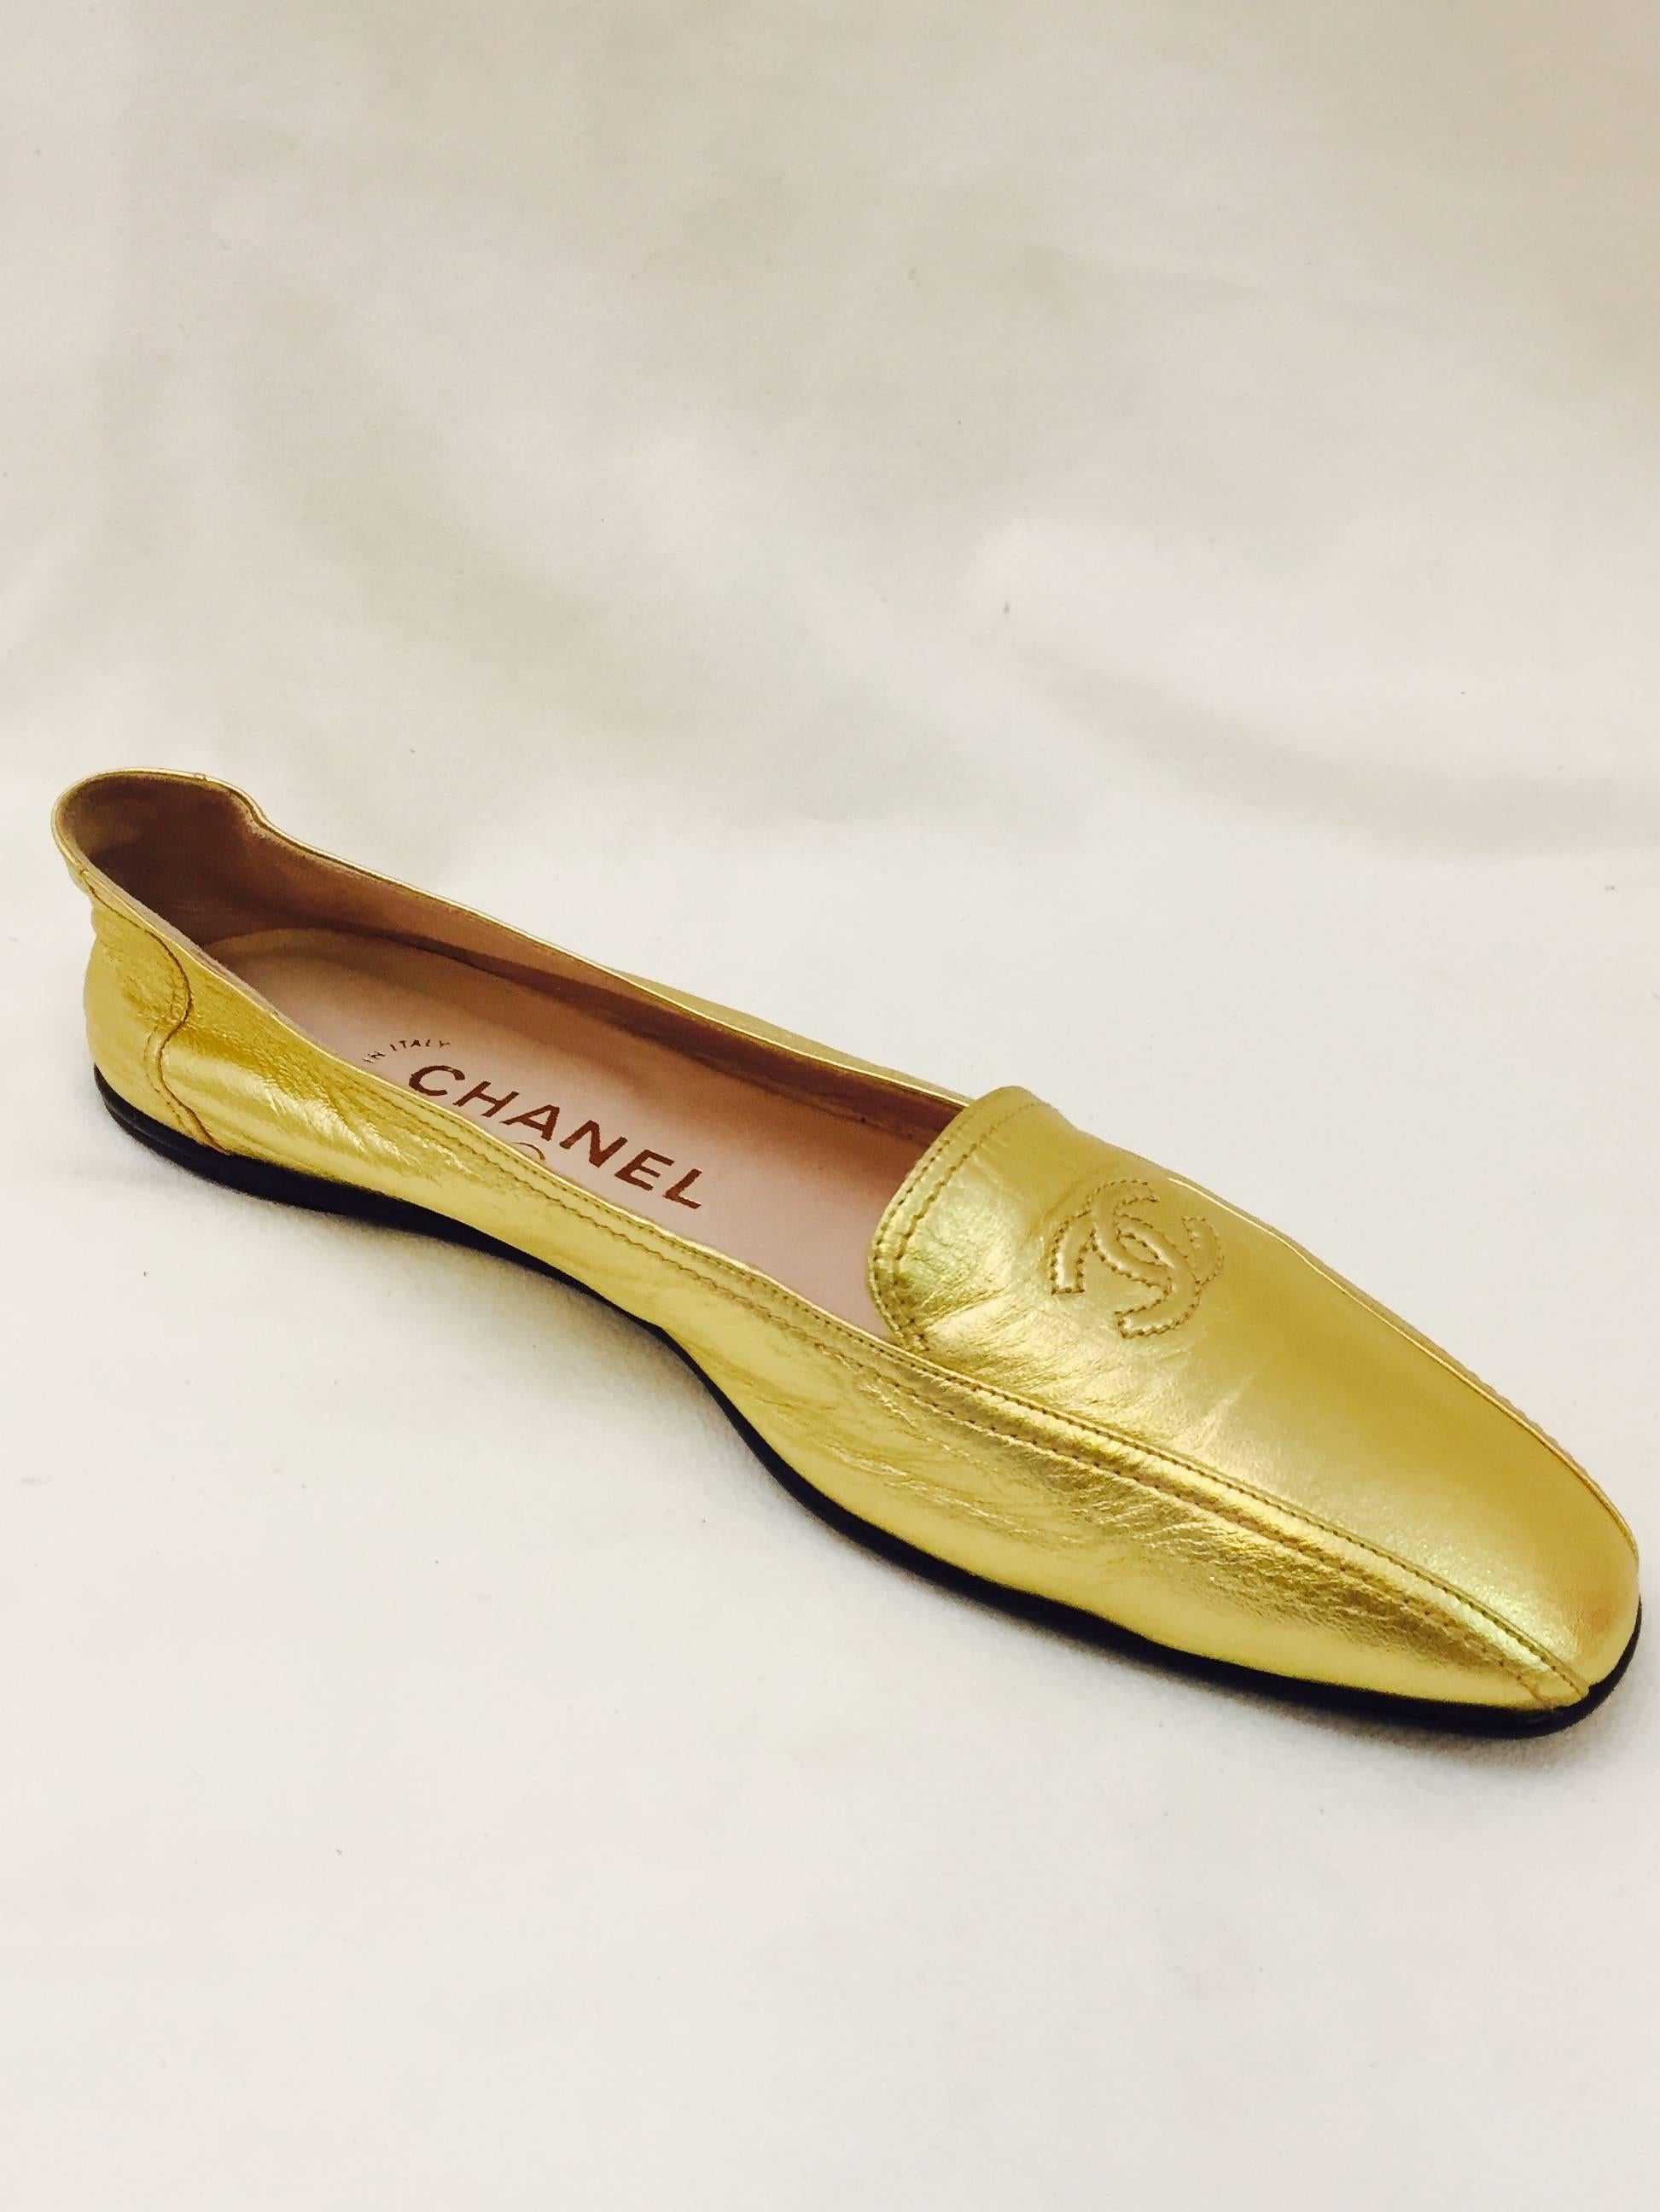 These metallic gold tone Chanel loafers are simply stupendous!  Glamorous ultra-soft soft lambskin makes these shoes feel like your walking on a golden cloud.  Finished with interlocking double 